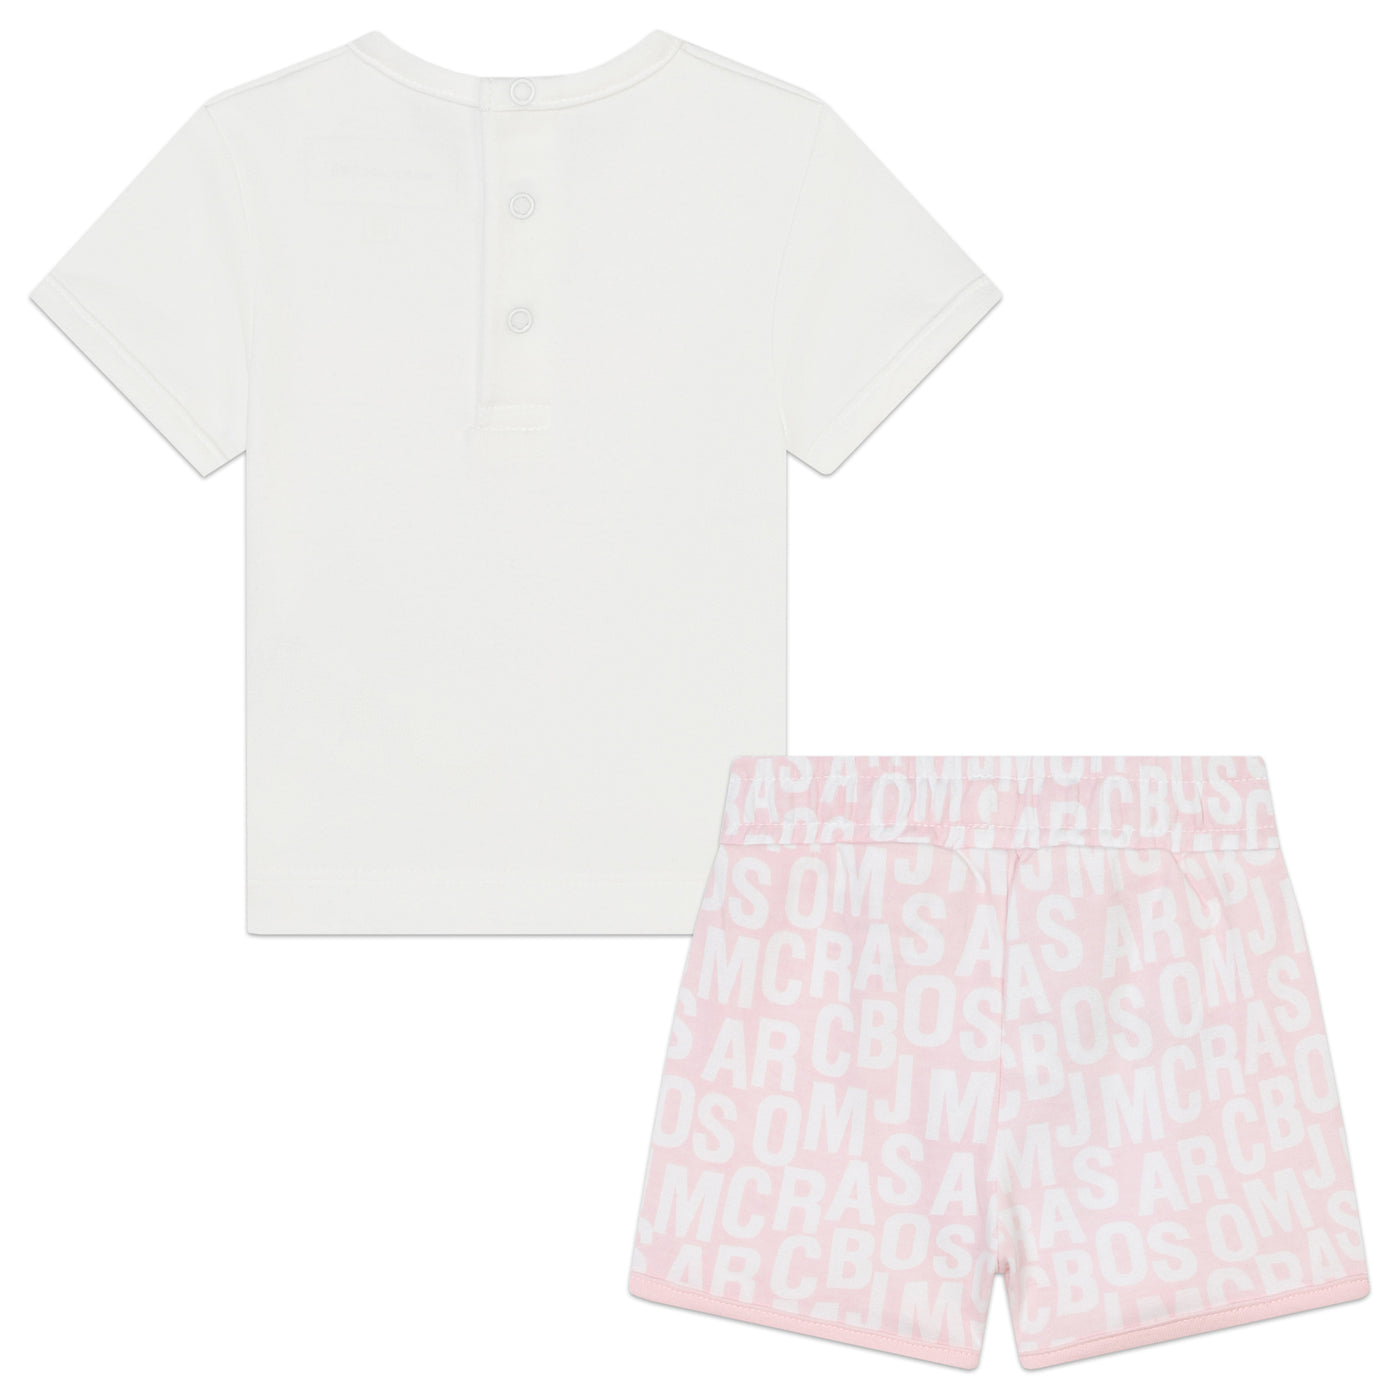 Girls Toddler T-shirt and Short Set by Marc Jacobs